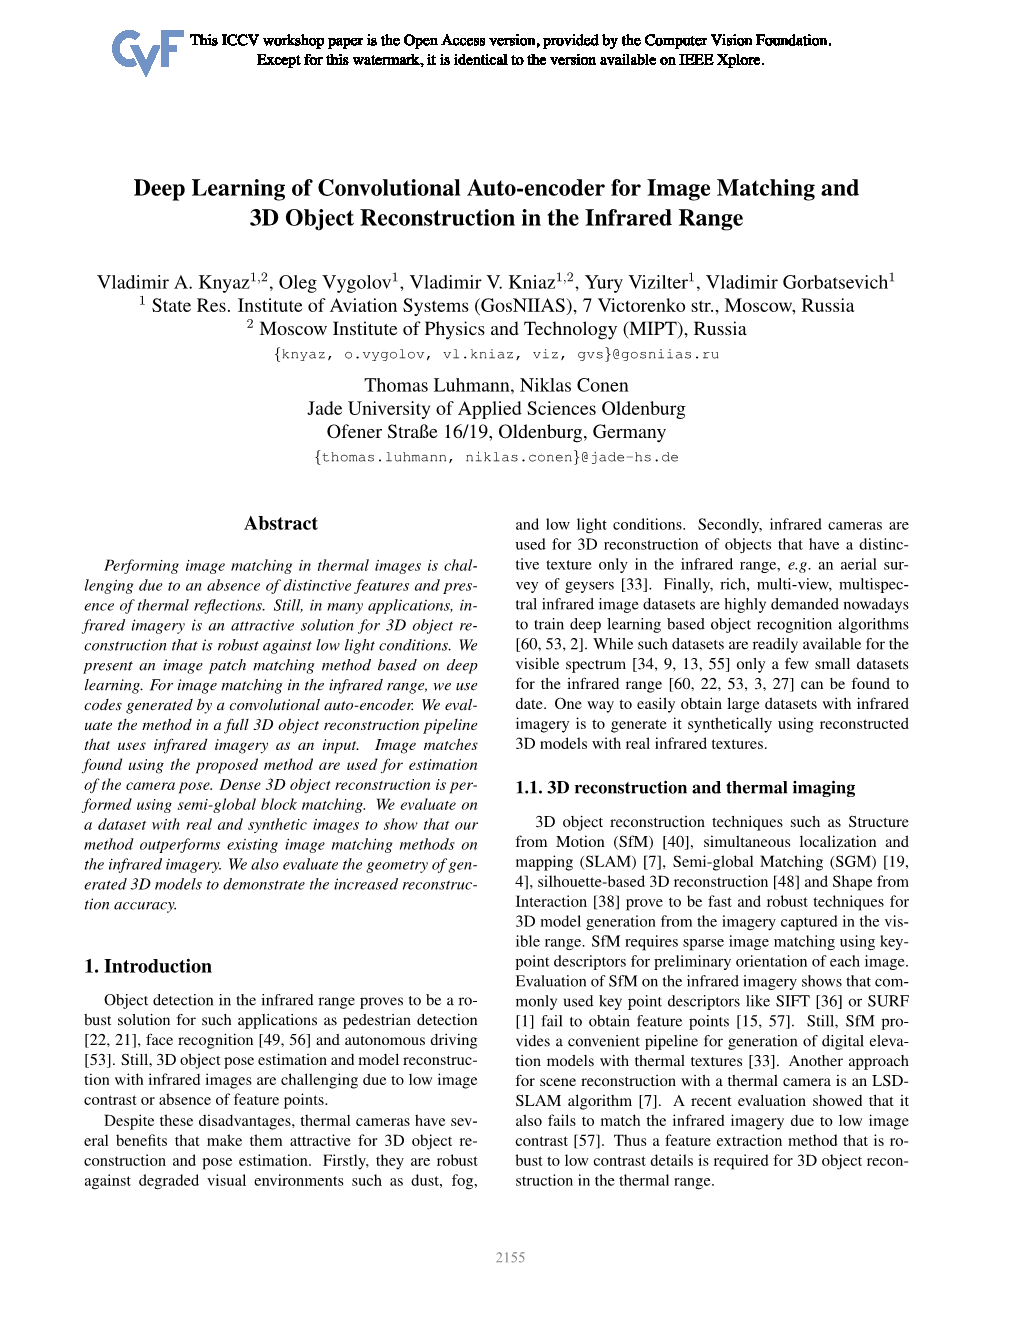 Deep Learning of Convolutional Auto-Encoder for Image Matching and 3D Object Reconstruction in the Infrared Range